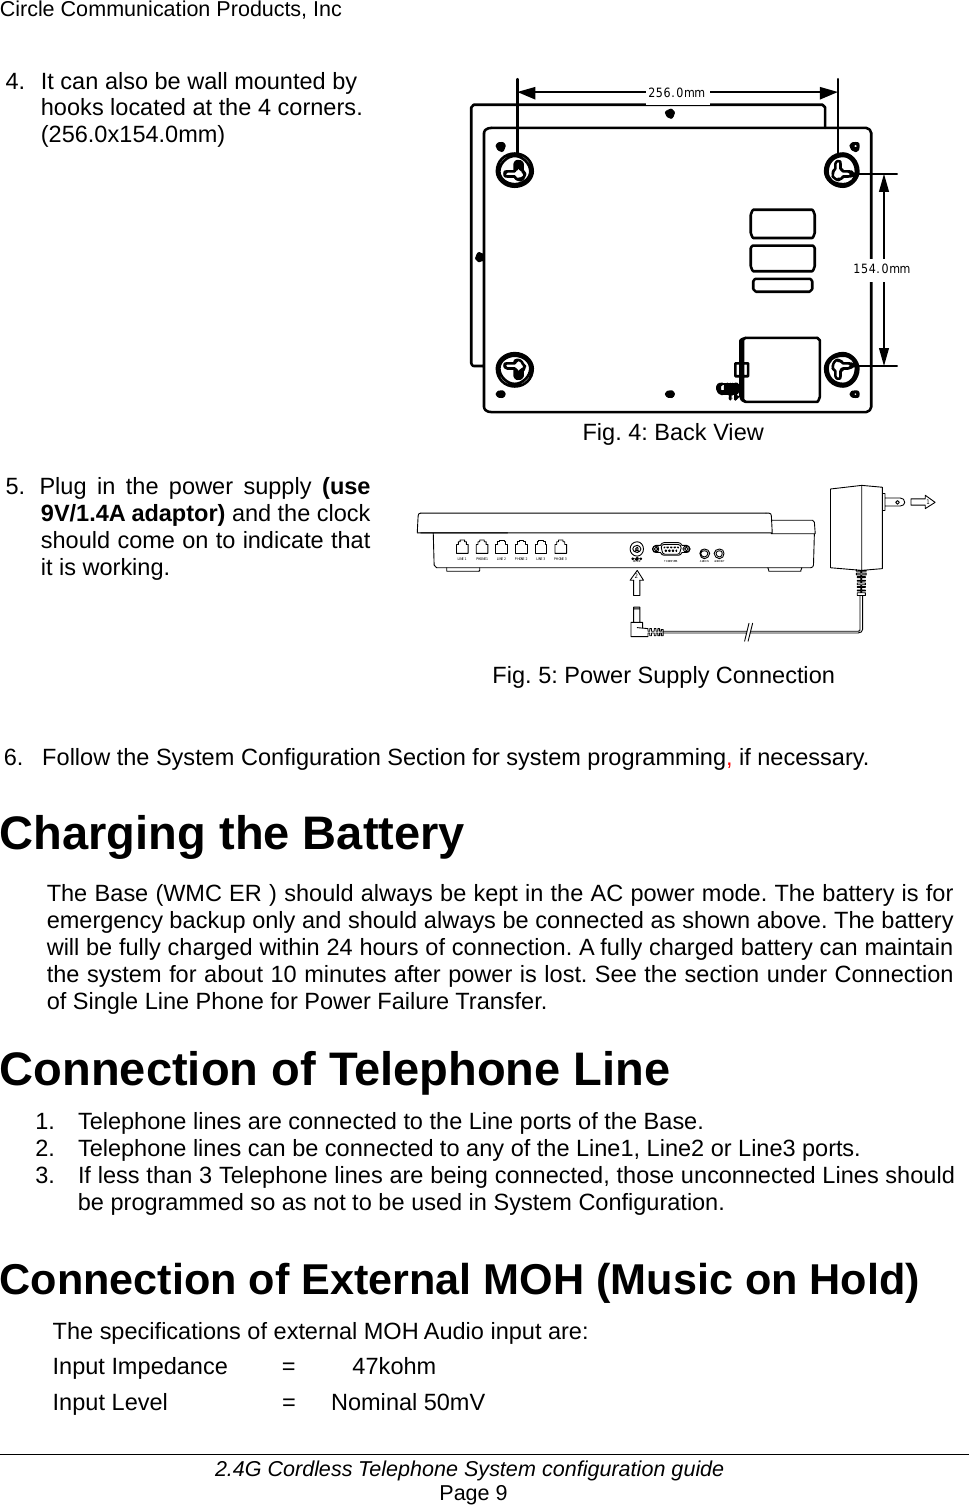 Circle Communication Products, Inc     2.4G Cordless Telephone System configuration guide Page 9 PHONE 1LINE 1 PHONE 2LINE 2 LINE 3 PHONE 3TO COMP UTERDC IN 9V AUDIO IN12AUDIO OUTDOORLOCK256.0mm154.0mm4.  It can also be wall mounted by hooks located at the 4 corners. (256.0x154.0mm)               Fig. 4: Back View  5.  Plug in the power supply (use 9V/1.4A adaptor) and the clock should come on to indicate that it is working.        Fig. 5: Power Supply Connection   6.  Follow the System Configuration Section for system programming, if necessary.  Charging the Battery The Base (WMC ER ) should always be kept in the AC power mode. The battery is for emergency backup only and should always be connected as shown above. The battery will be fully charged within 24 hours of connection. A fully charged battery can maintain the system for about 10 minutes after power is lost. See the section under Connection of Single Line Phone for Power Failure Transfer.  Connection of Telephone Line 1.  Telephone lines are connected to the Line ports of the Base. 2.  Telephone lines can be connected to any of the Line1, Line2 or Line3 ports. 3.  If less than 3 Telephone lines are being connected, those unconnected Lines should be programmed so as not to be used in System Configuration.  Connection of External MOH (Music on Hold) The specifications of external MOH Audio input are: Input Impedance   =    47kohm Input Level  =   Nominal 50mV  